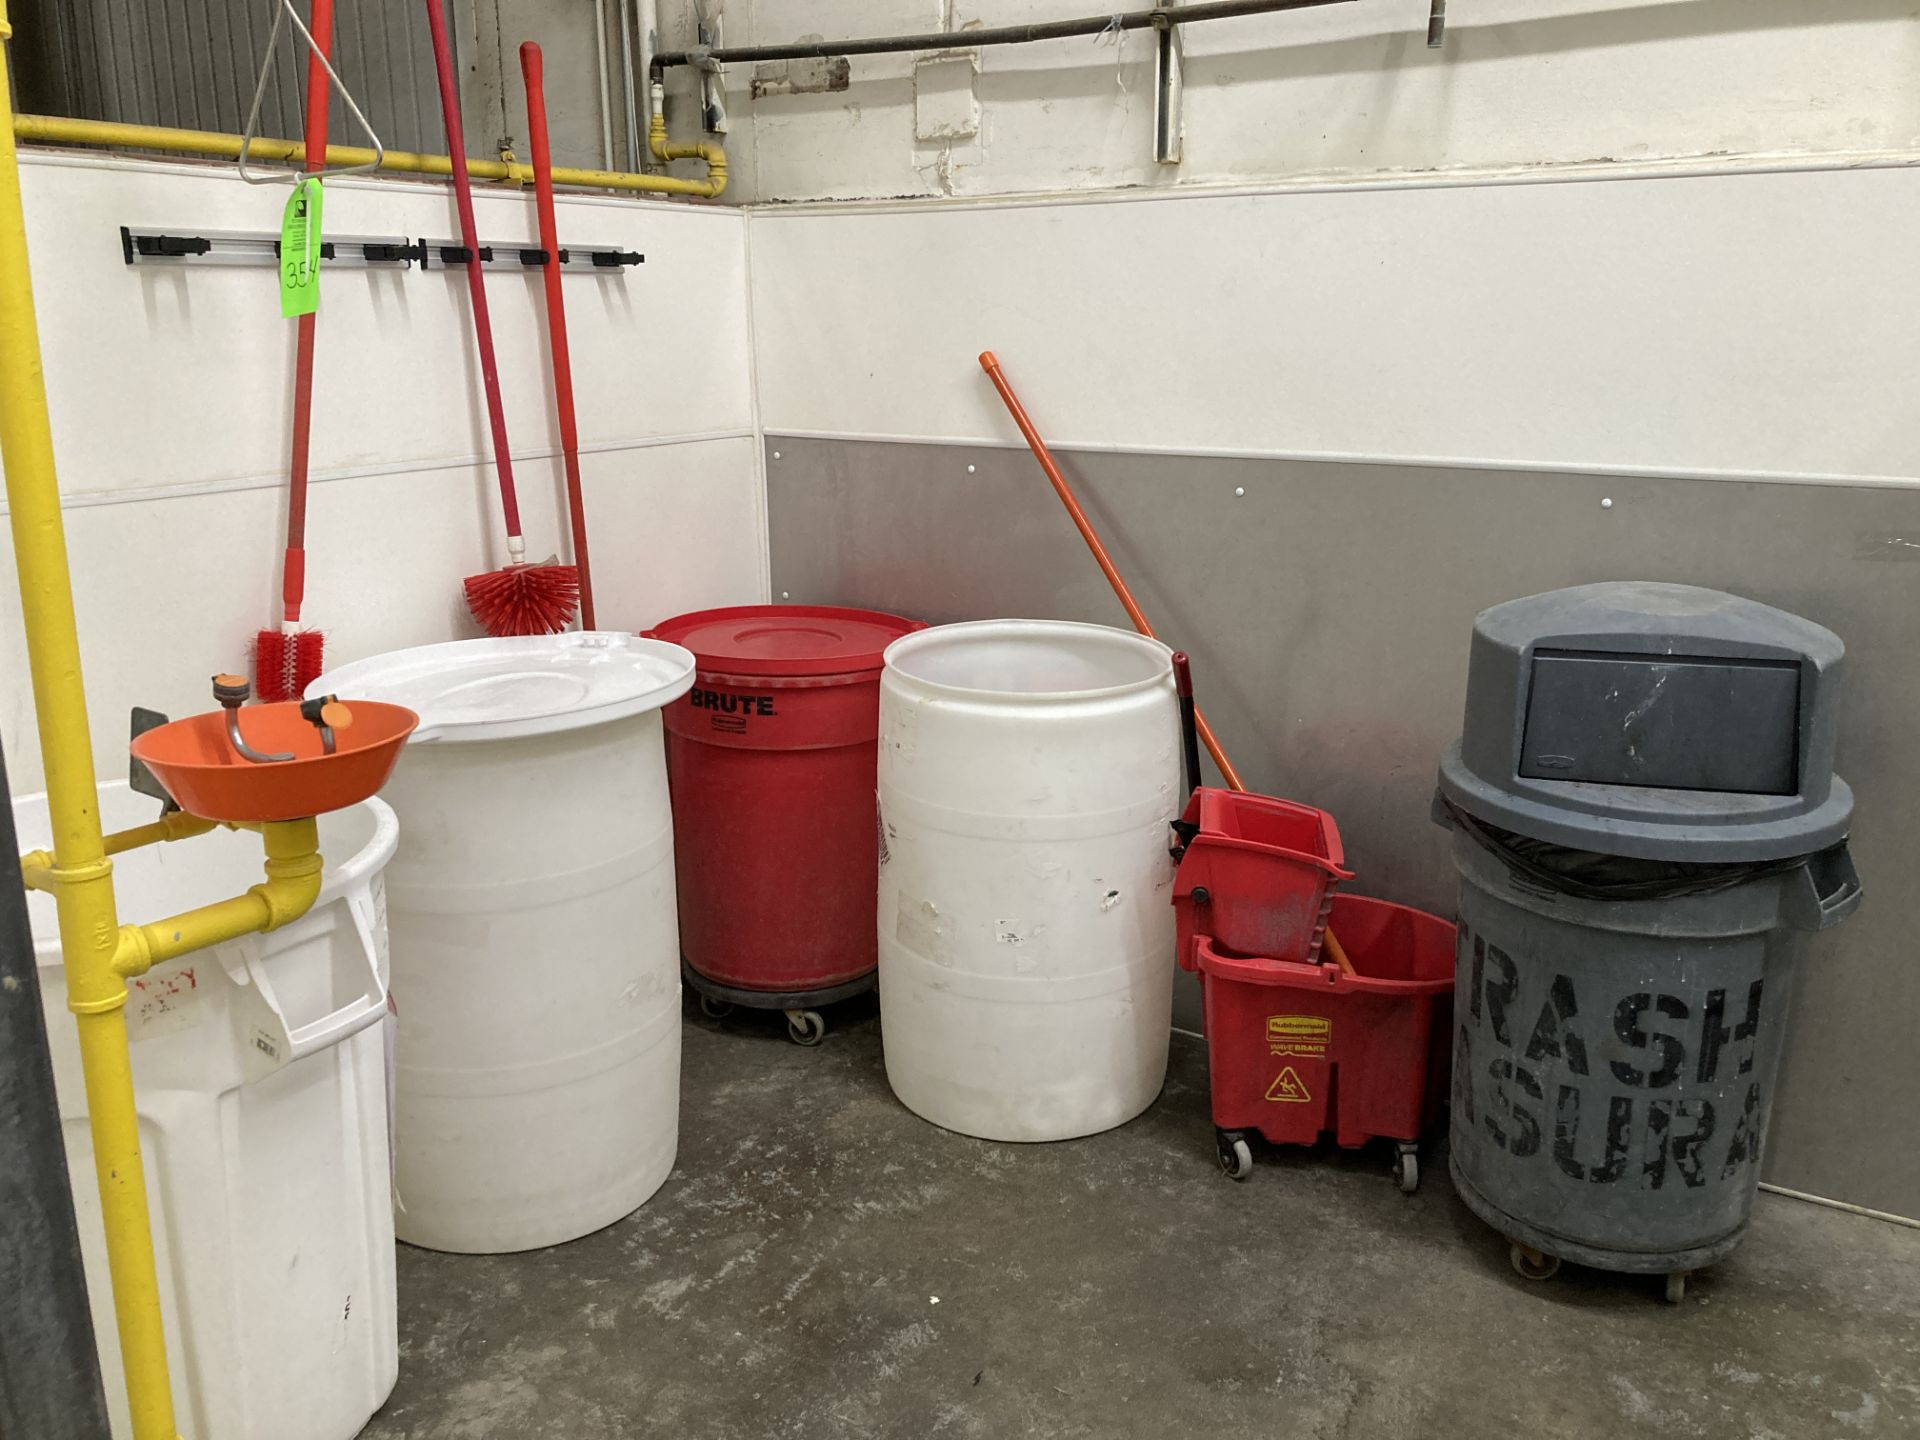 LOT OF waste containers, mop and bucket, brushes, squeegee, wall rack, eye wash shower station - Image 3 of 3